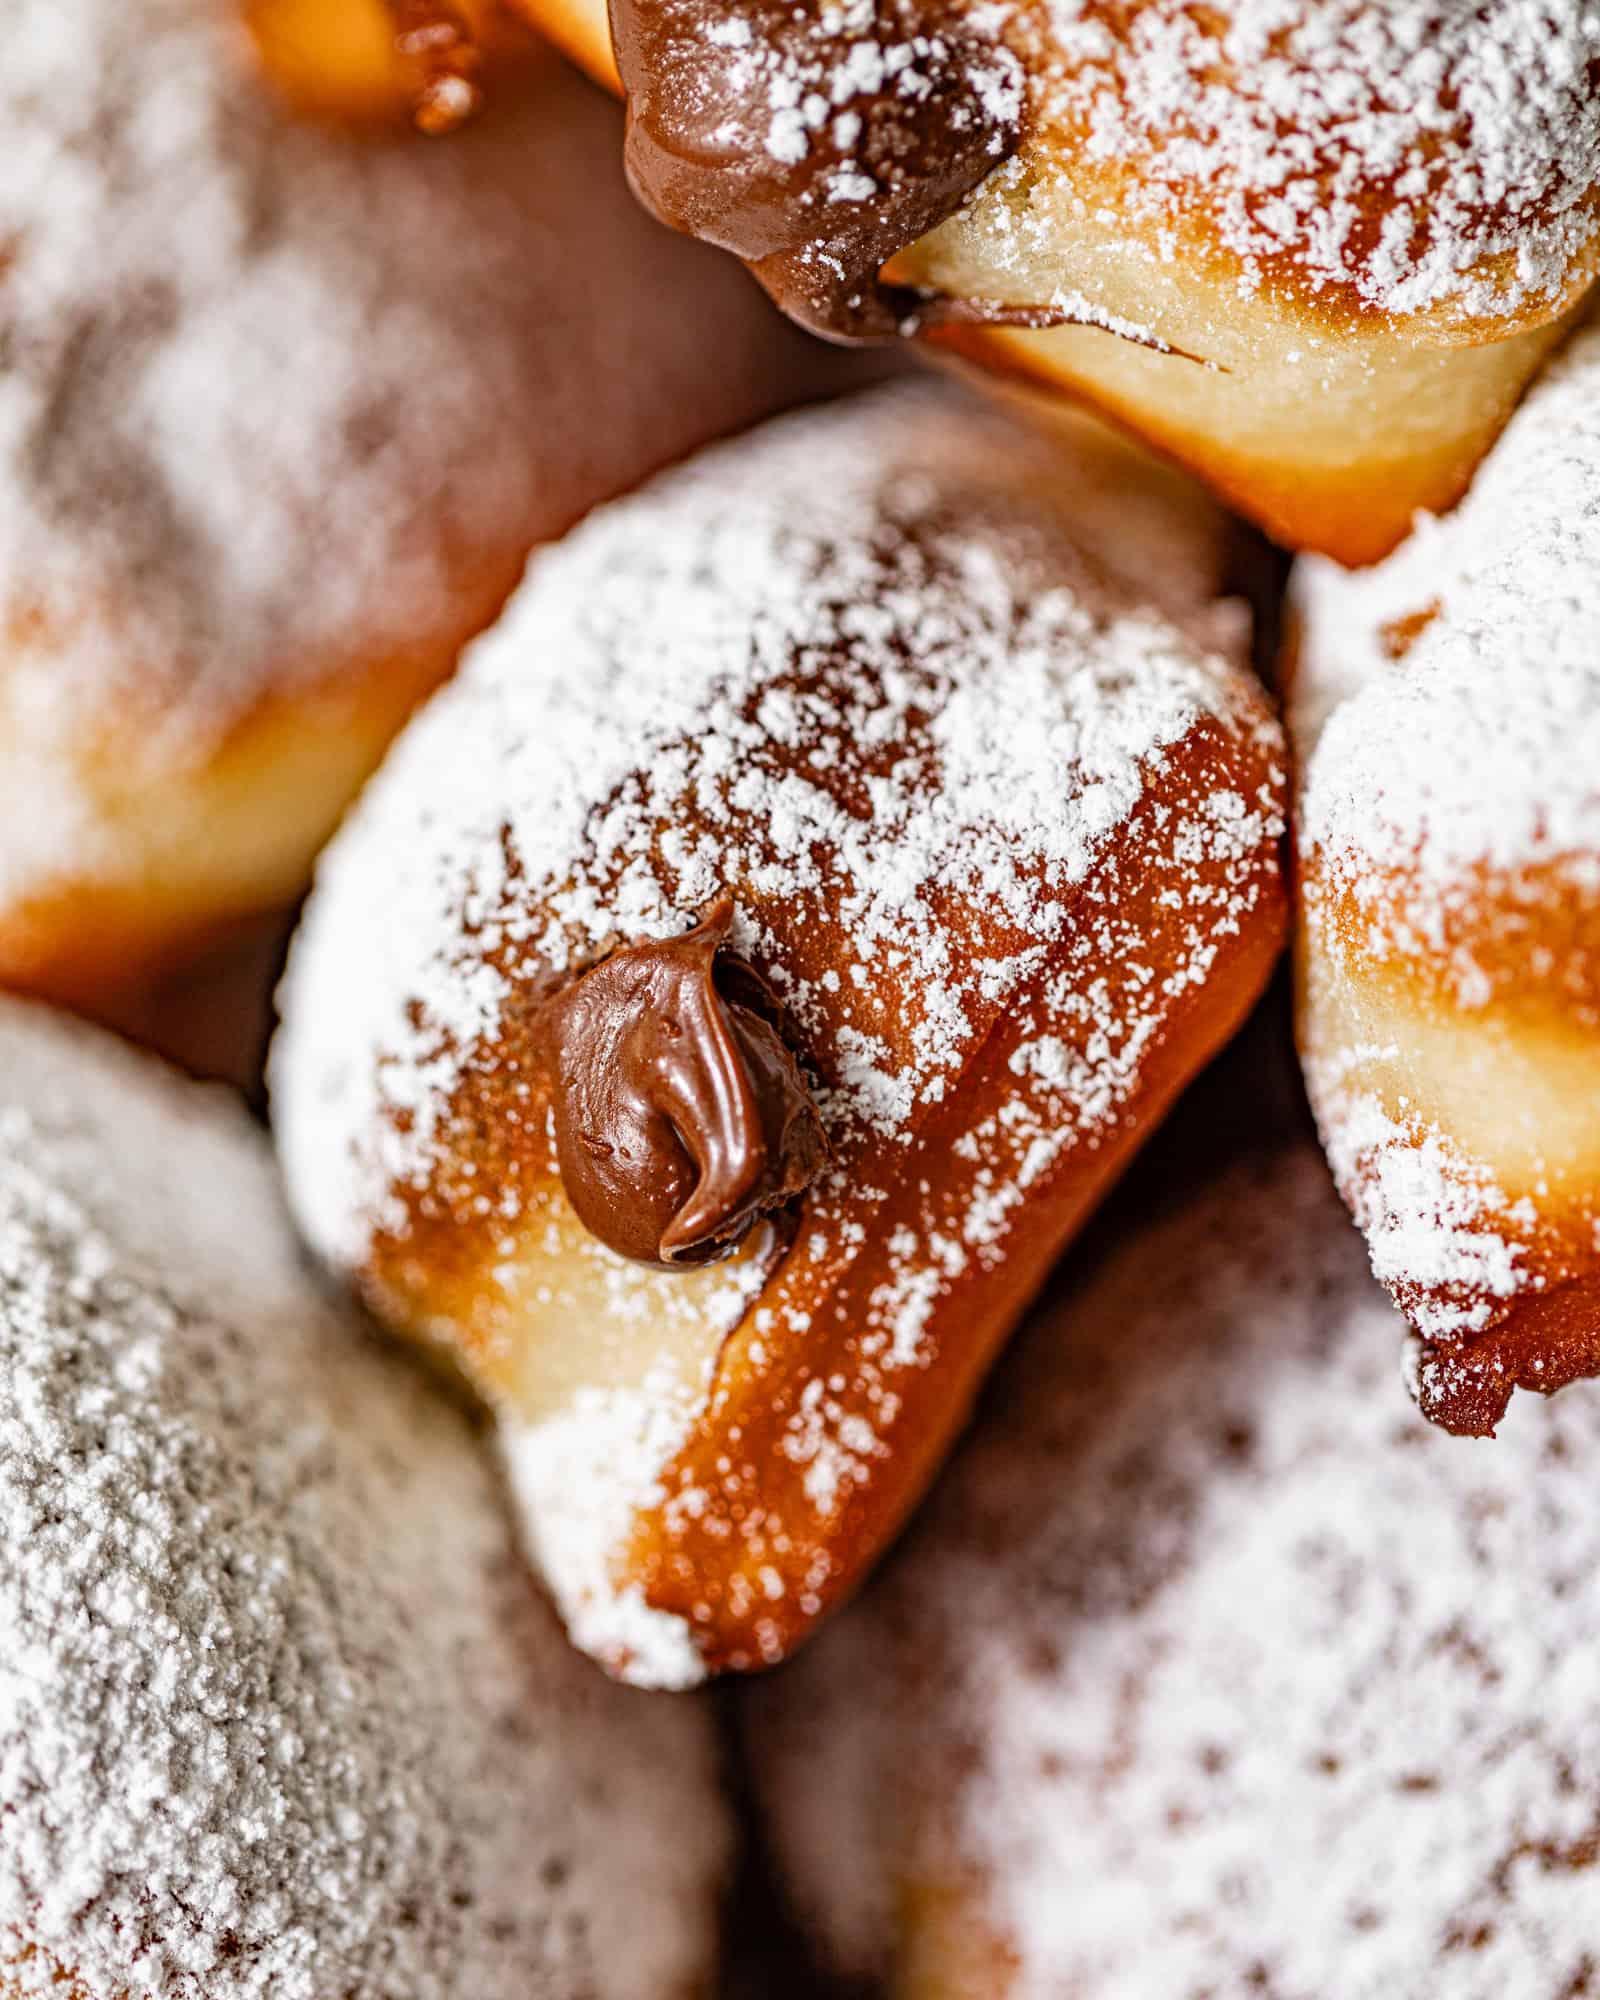 up close photo of nutella beignets topped with powdered sugar and nutella coming out of the beignet.